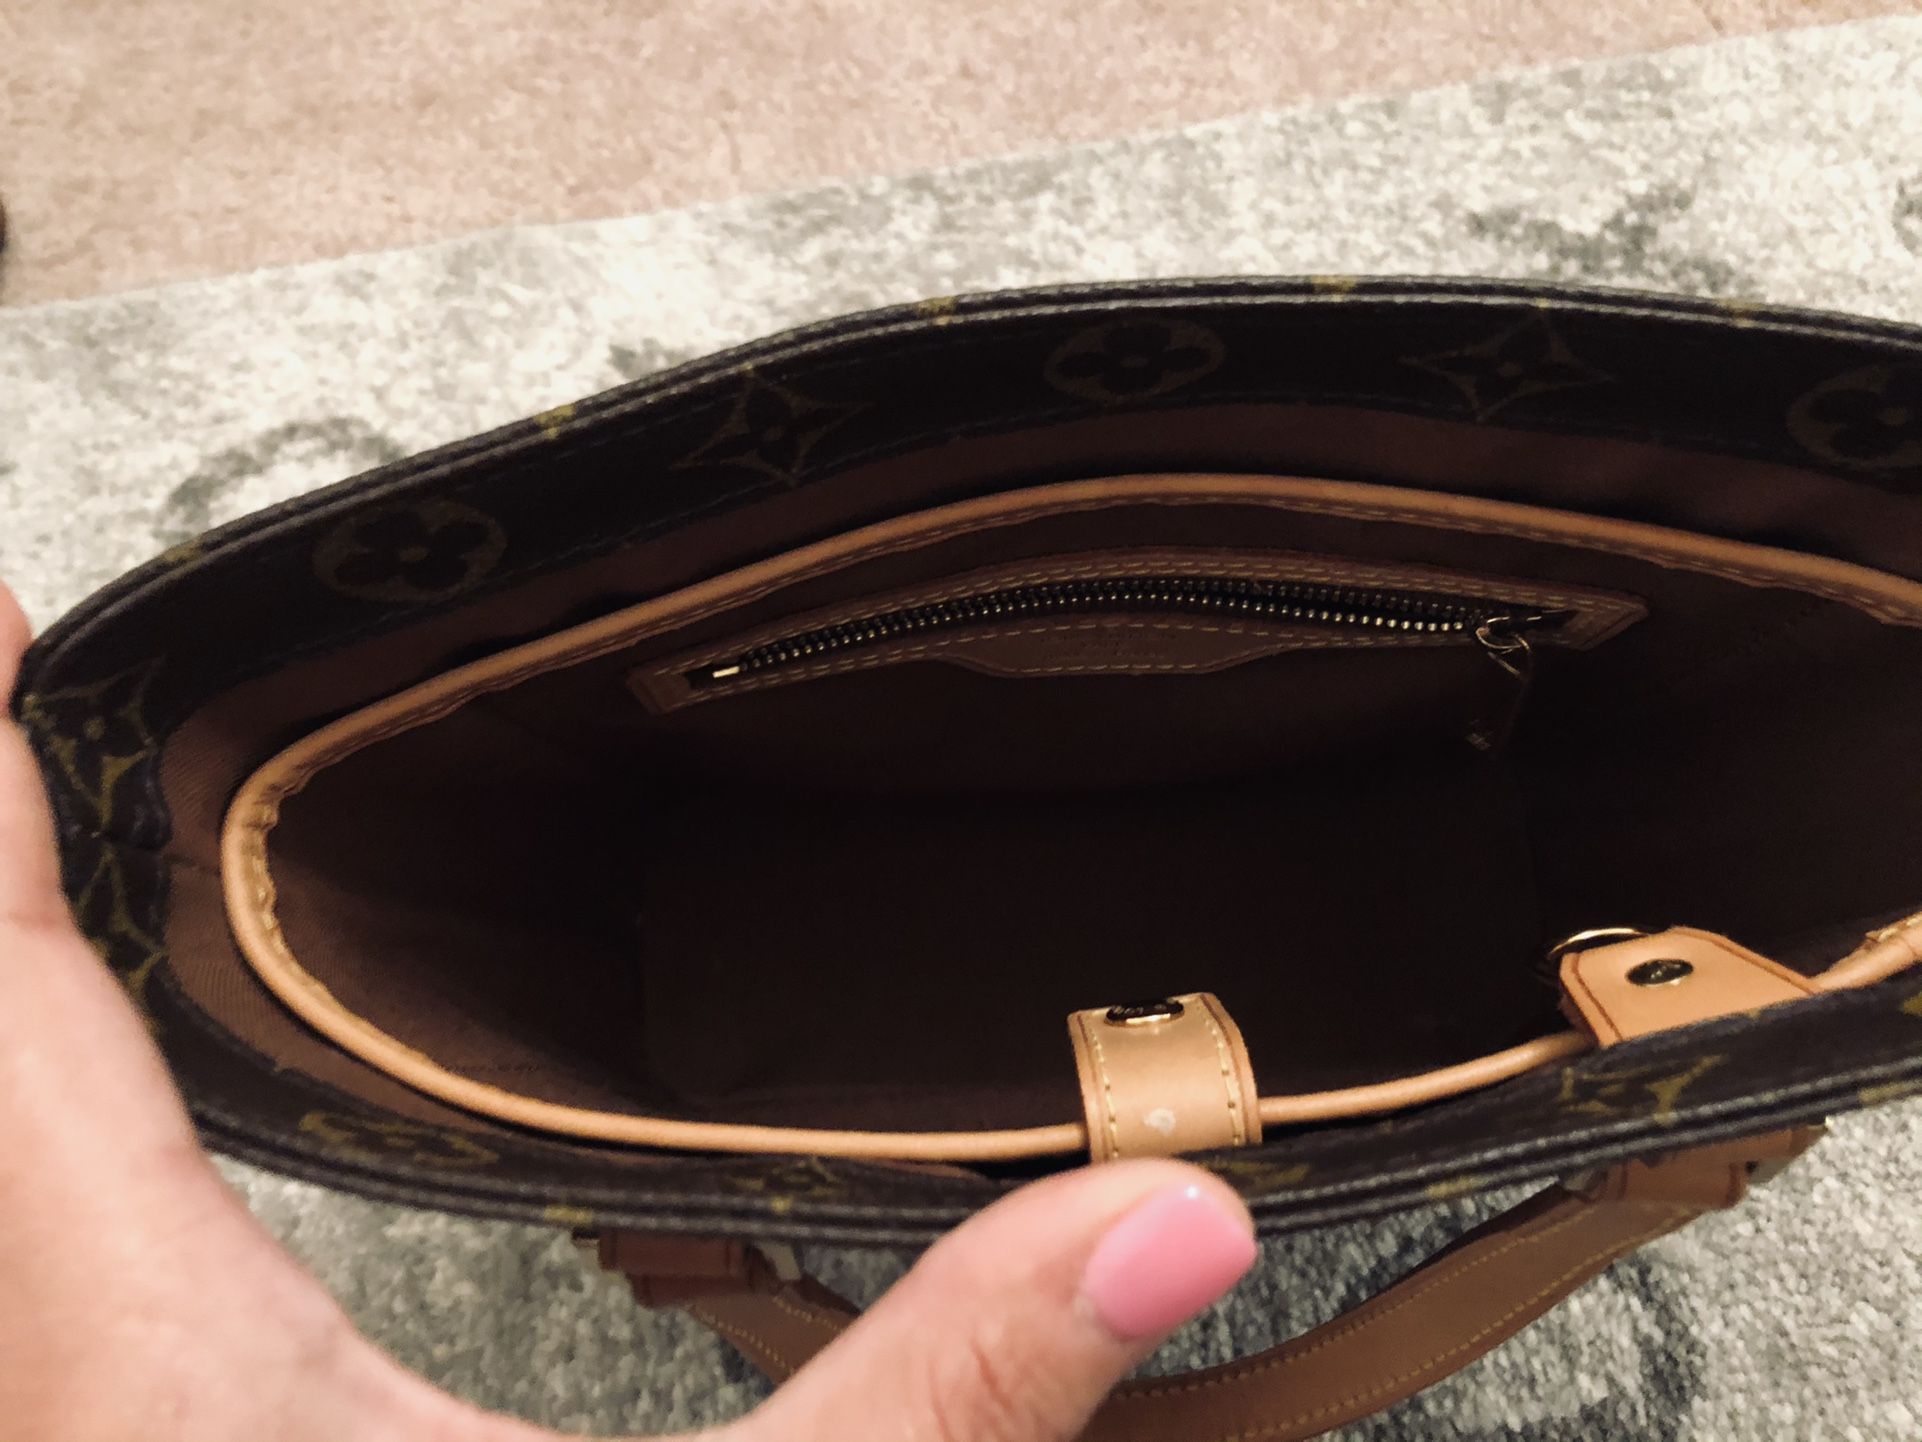 Authentic Louis Vuitton Small Handbag for Sale in Odessa, TX - OfferUp